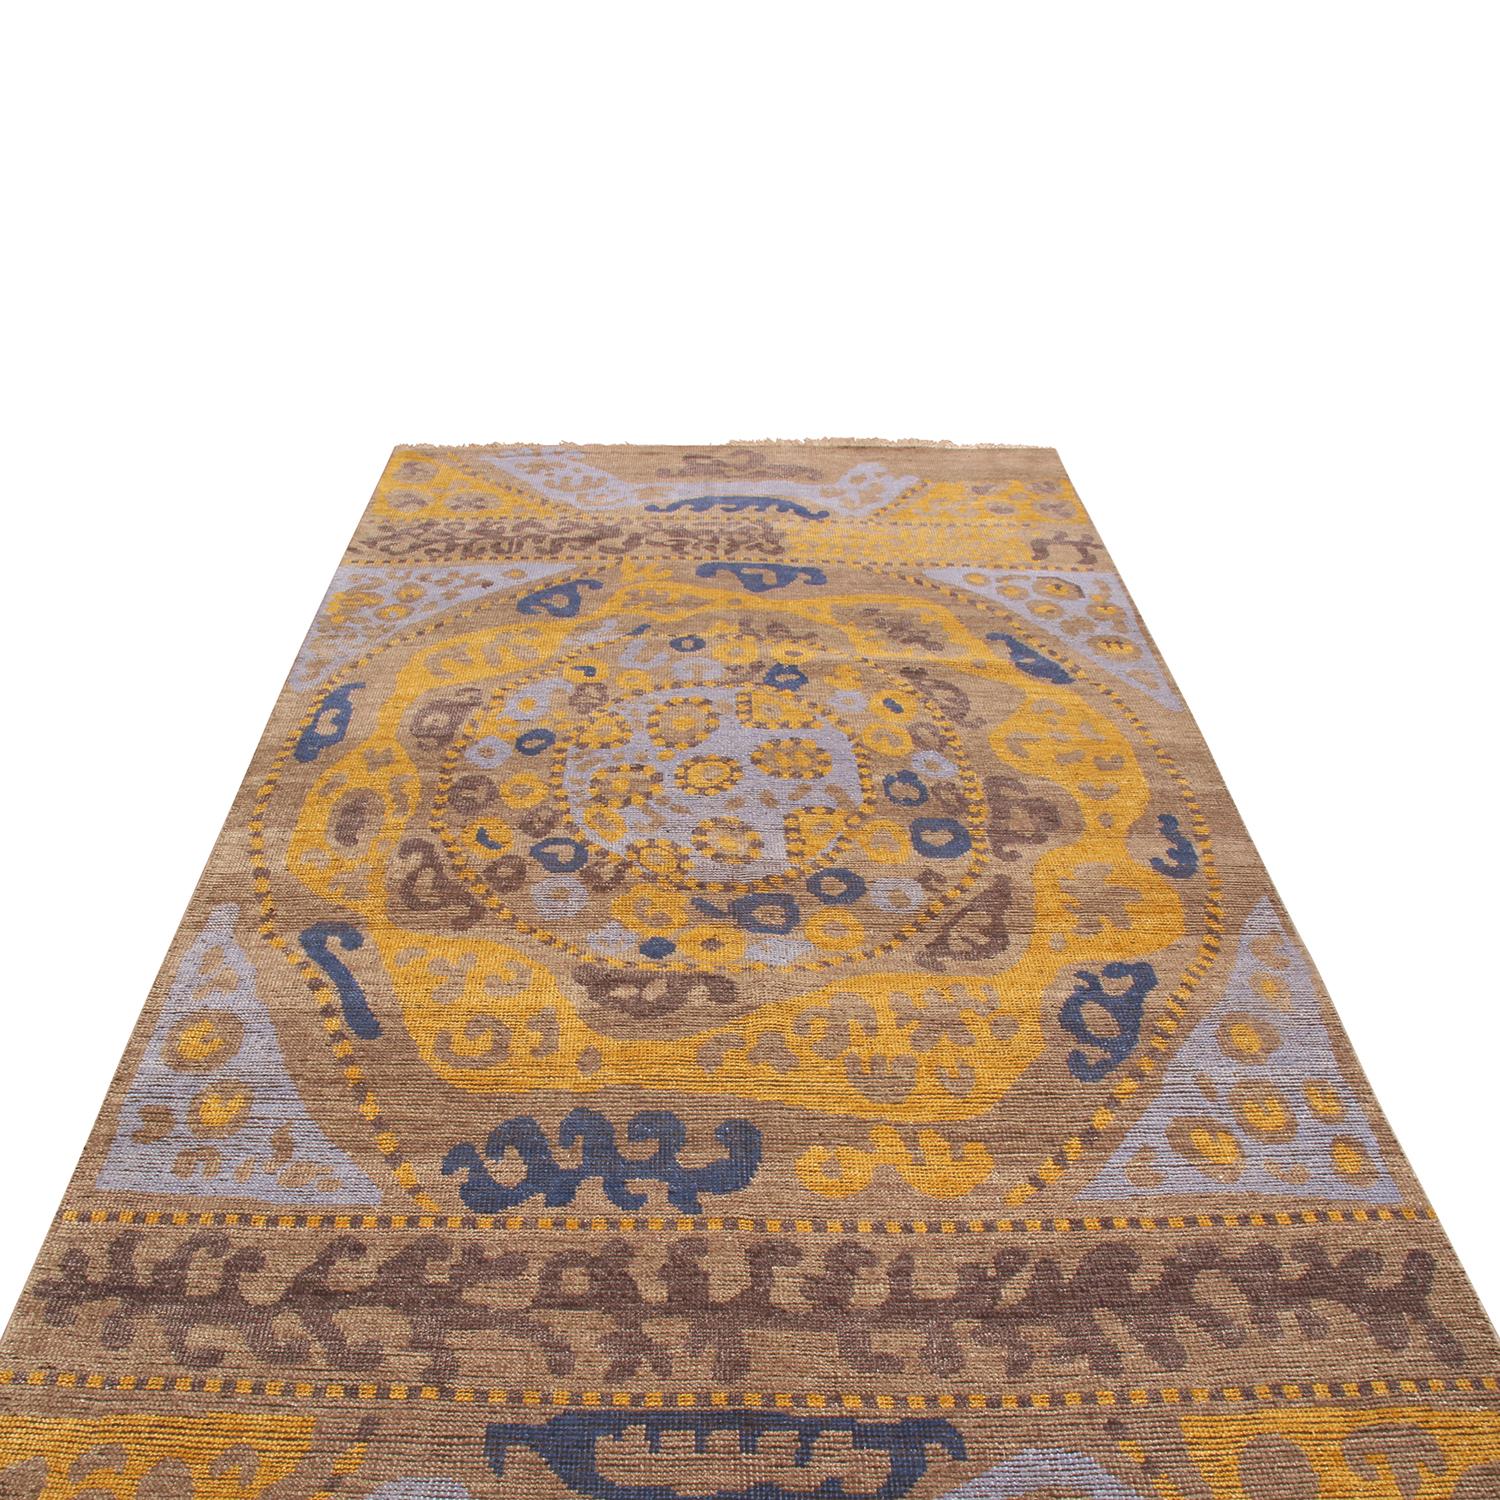 This custom capable stock rug represents the latest bold additions to Rug & Kilim's Burano collection, reputed for its pioneering method of capturing classic patterns with especially European sensible interpretations of Oriental inspirations.